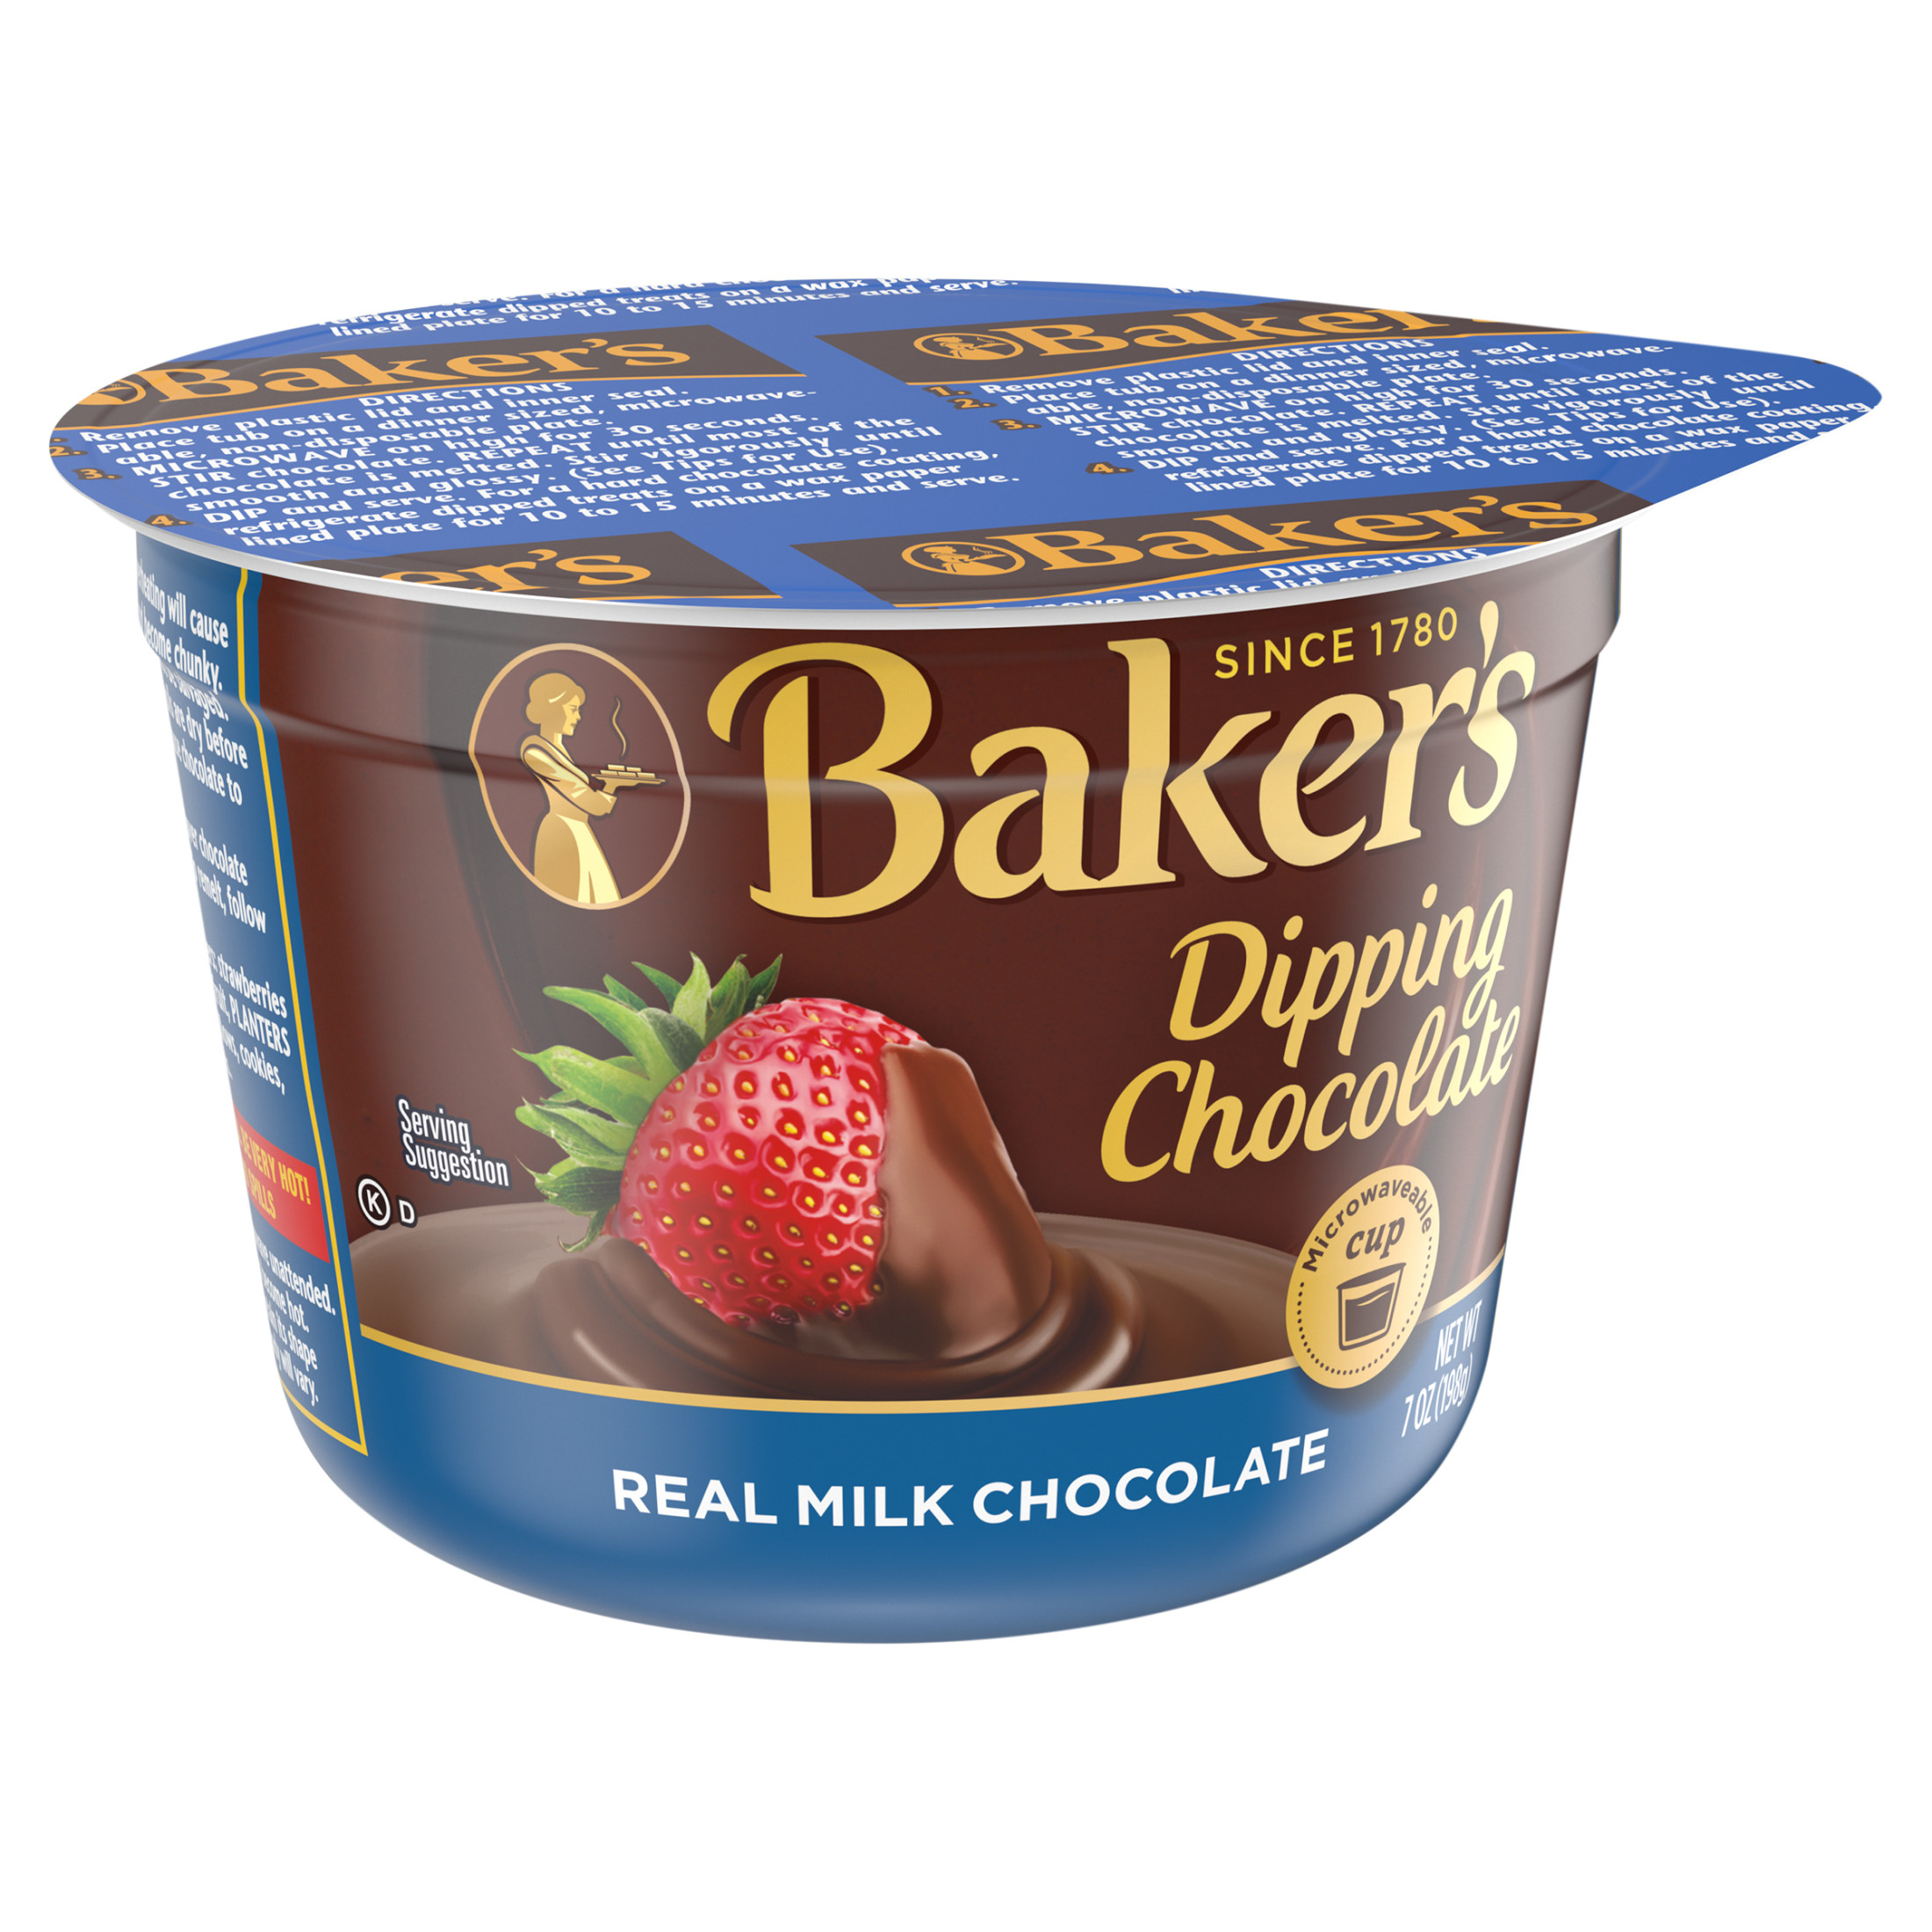 Baker's Real Milk Dipping Chocolate, 7 oz Cup - image 3 of 6